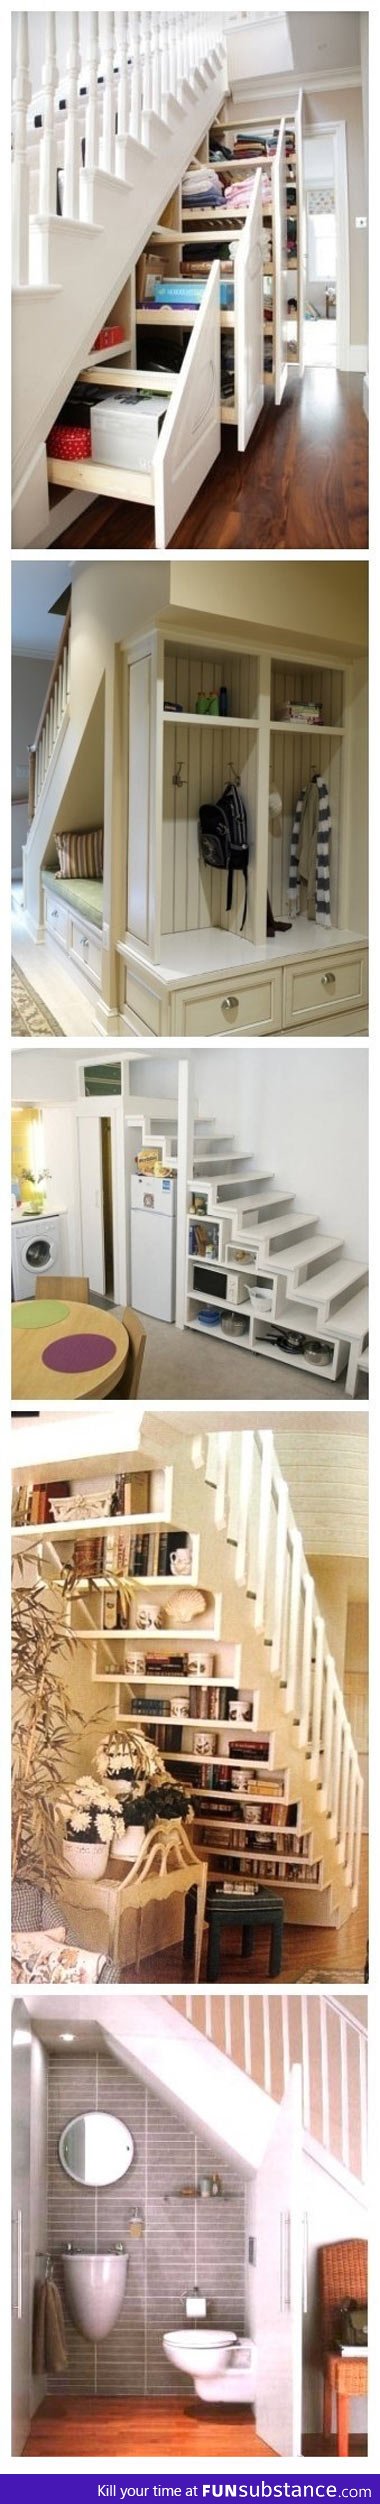 Brilliant ideas to use the space under the stairs